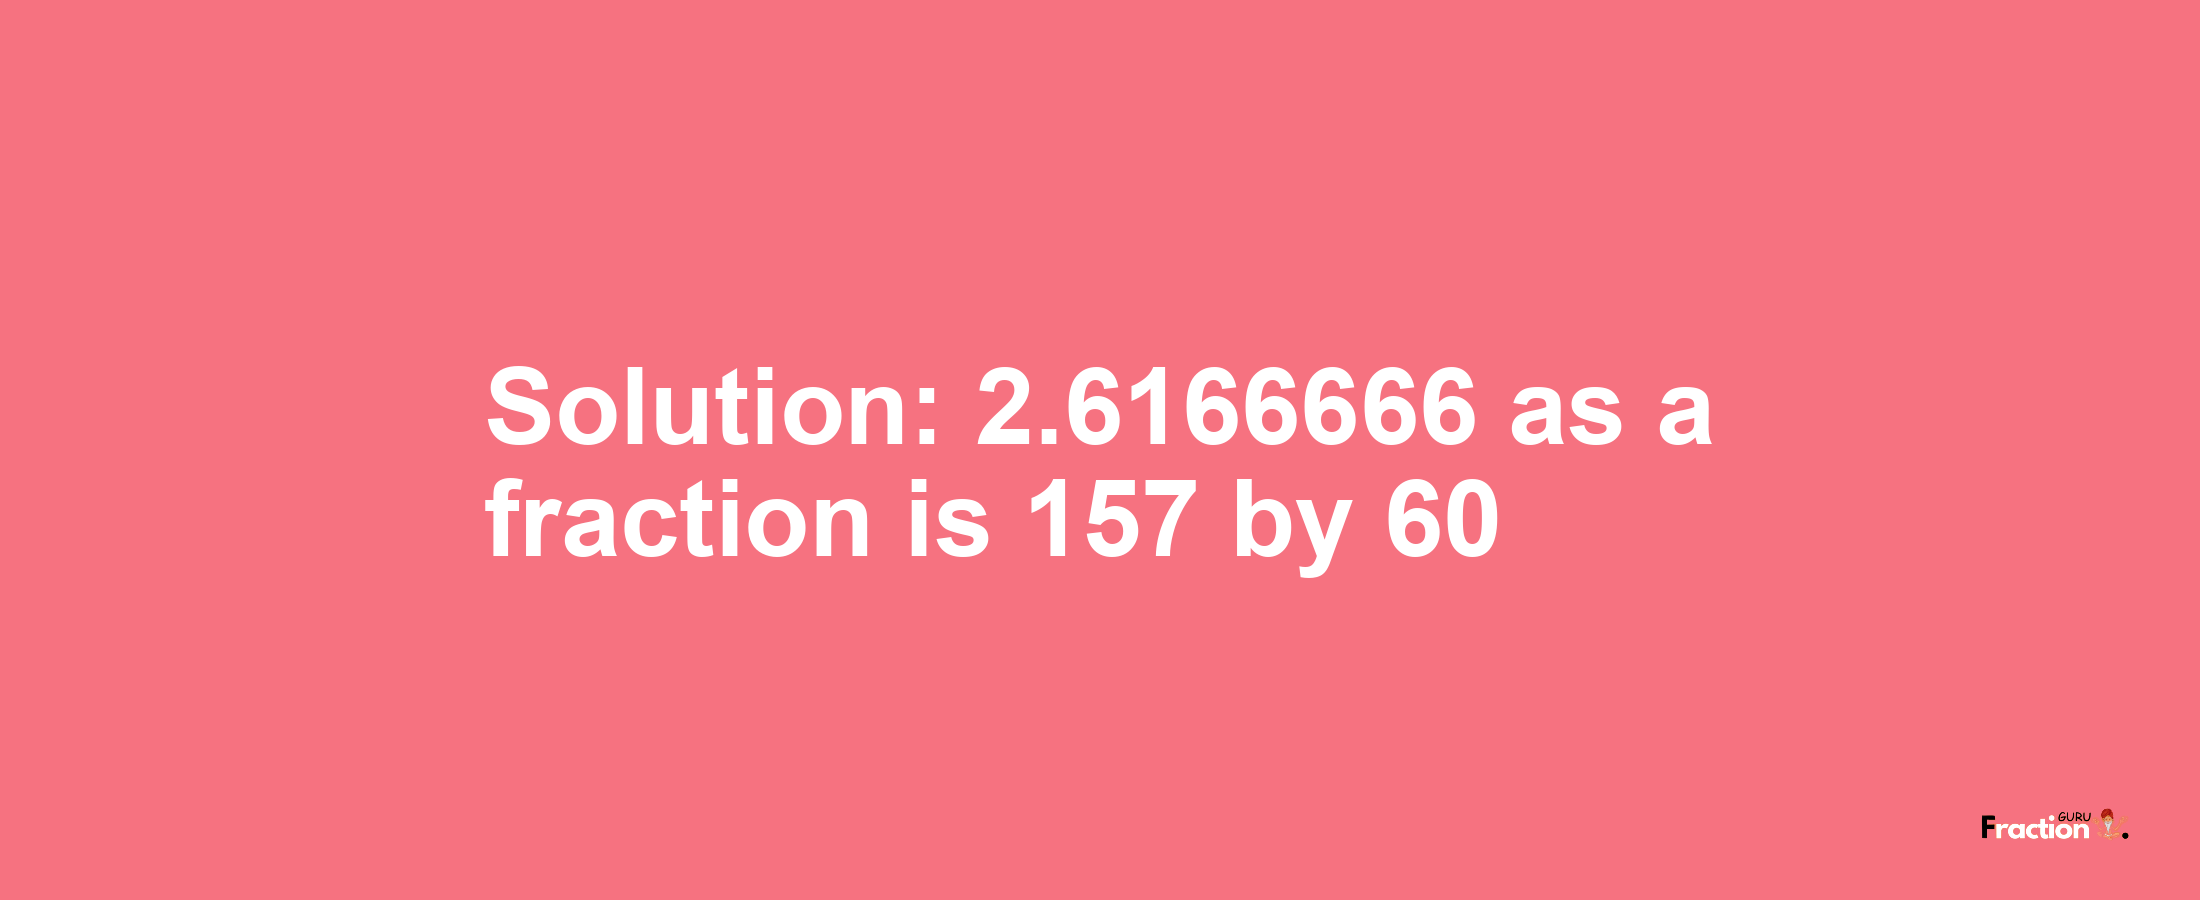 Solution:2.6166666 as a fraction is 157/60